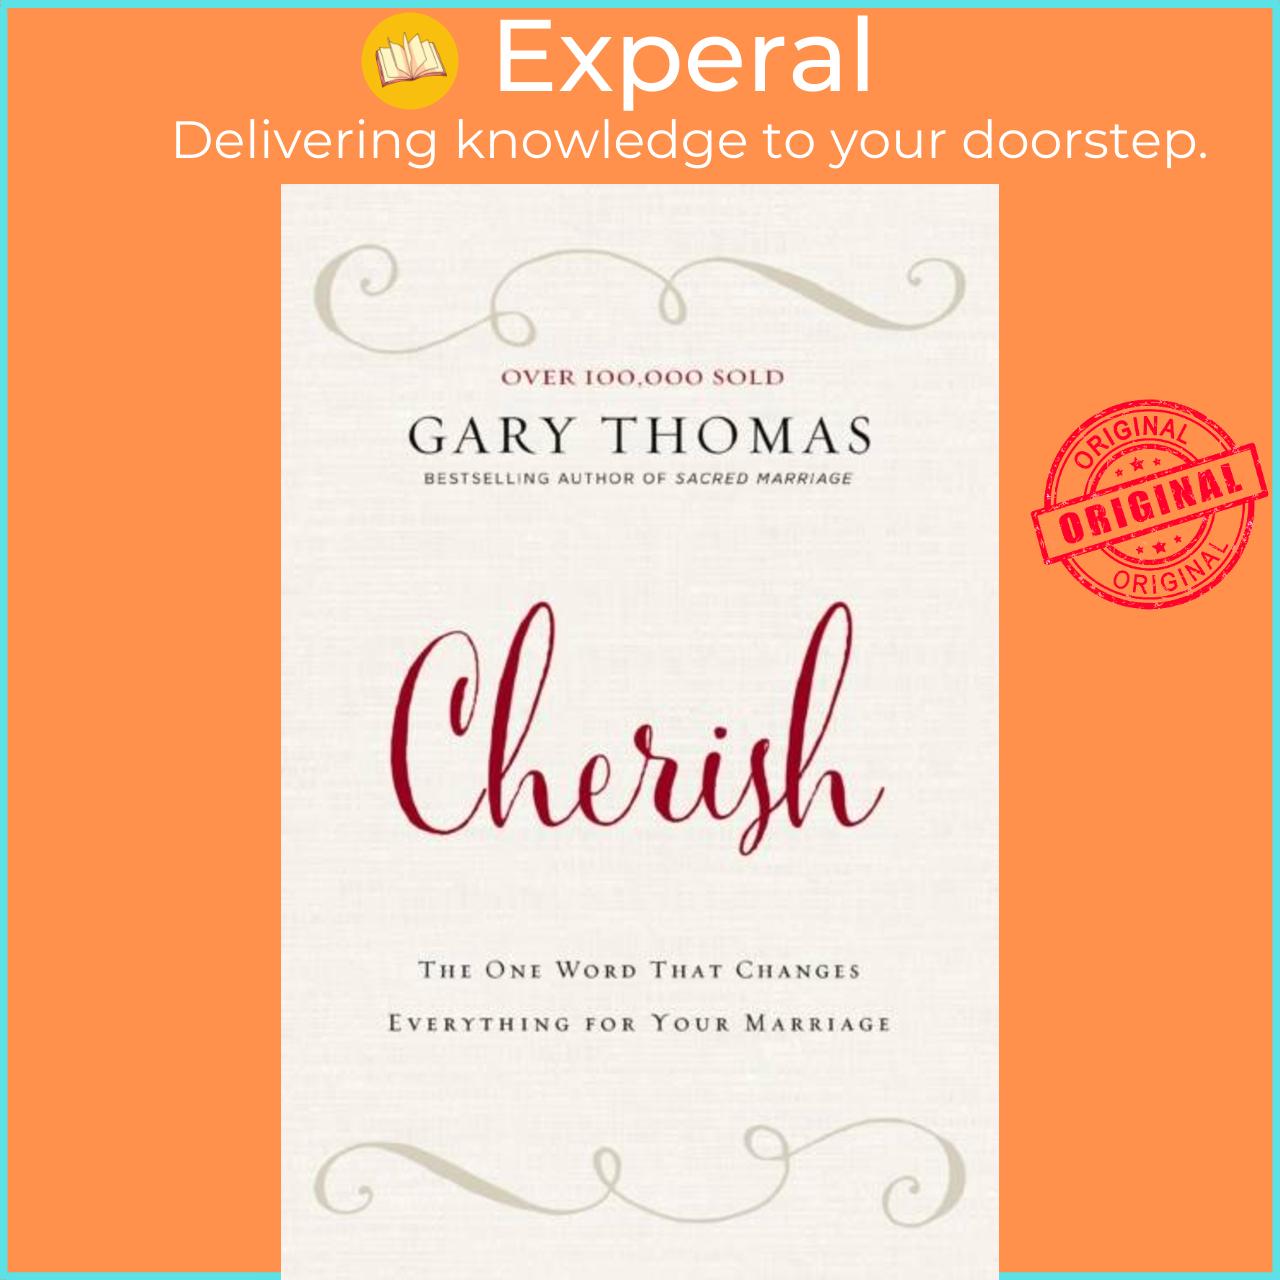 Sách - Cherish - The One Word That Changes Everything for Your Marriage by Gary L. Thomas (UK edition, paperback)